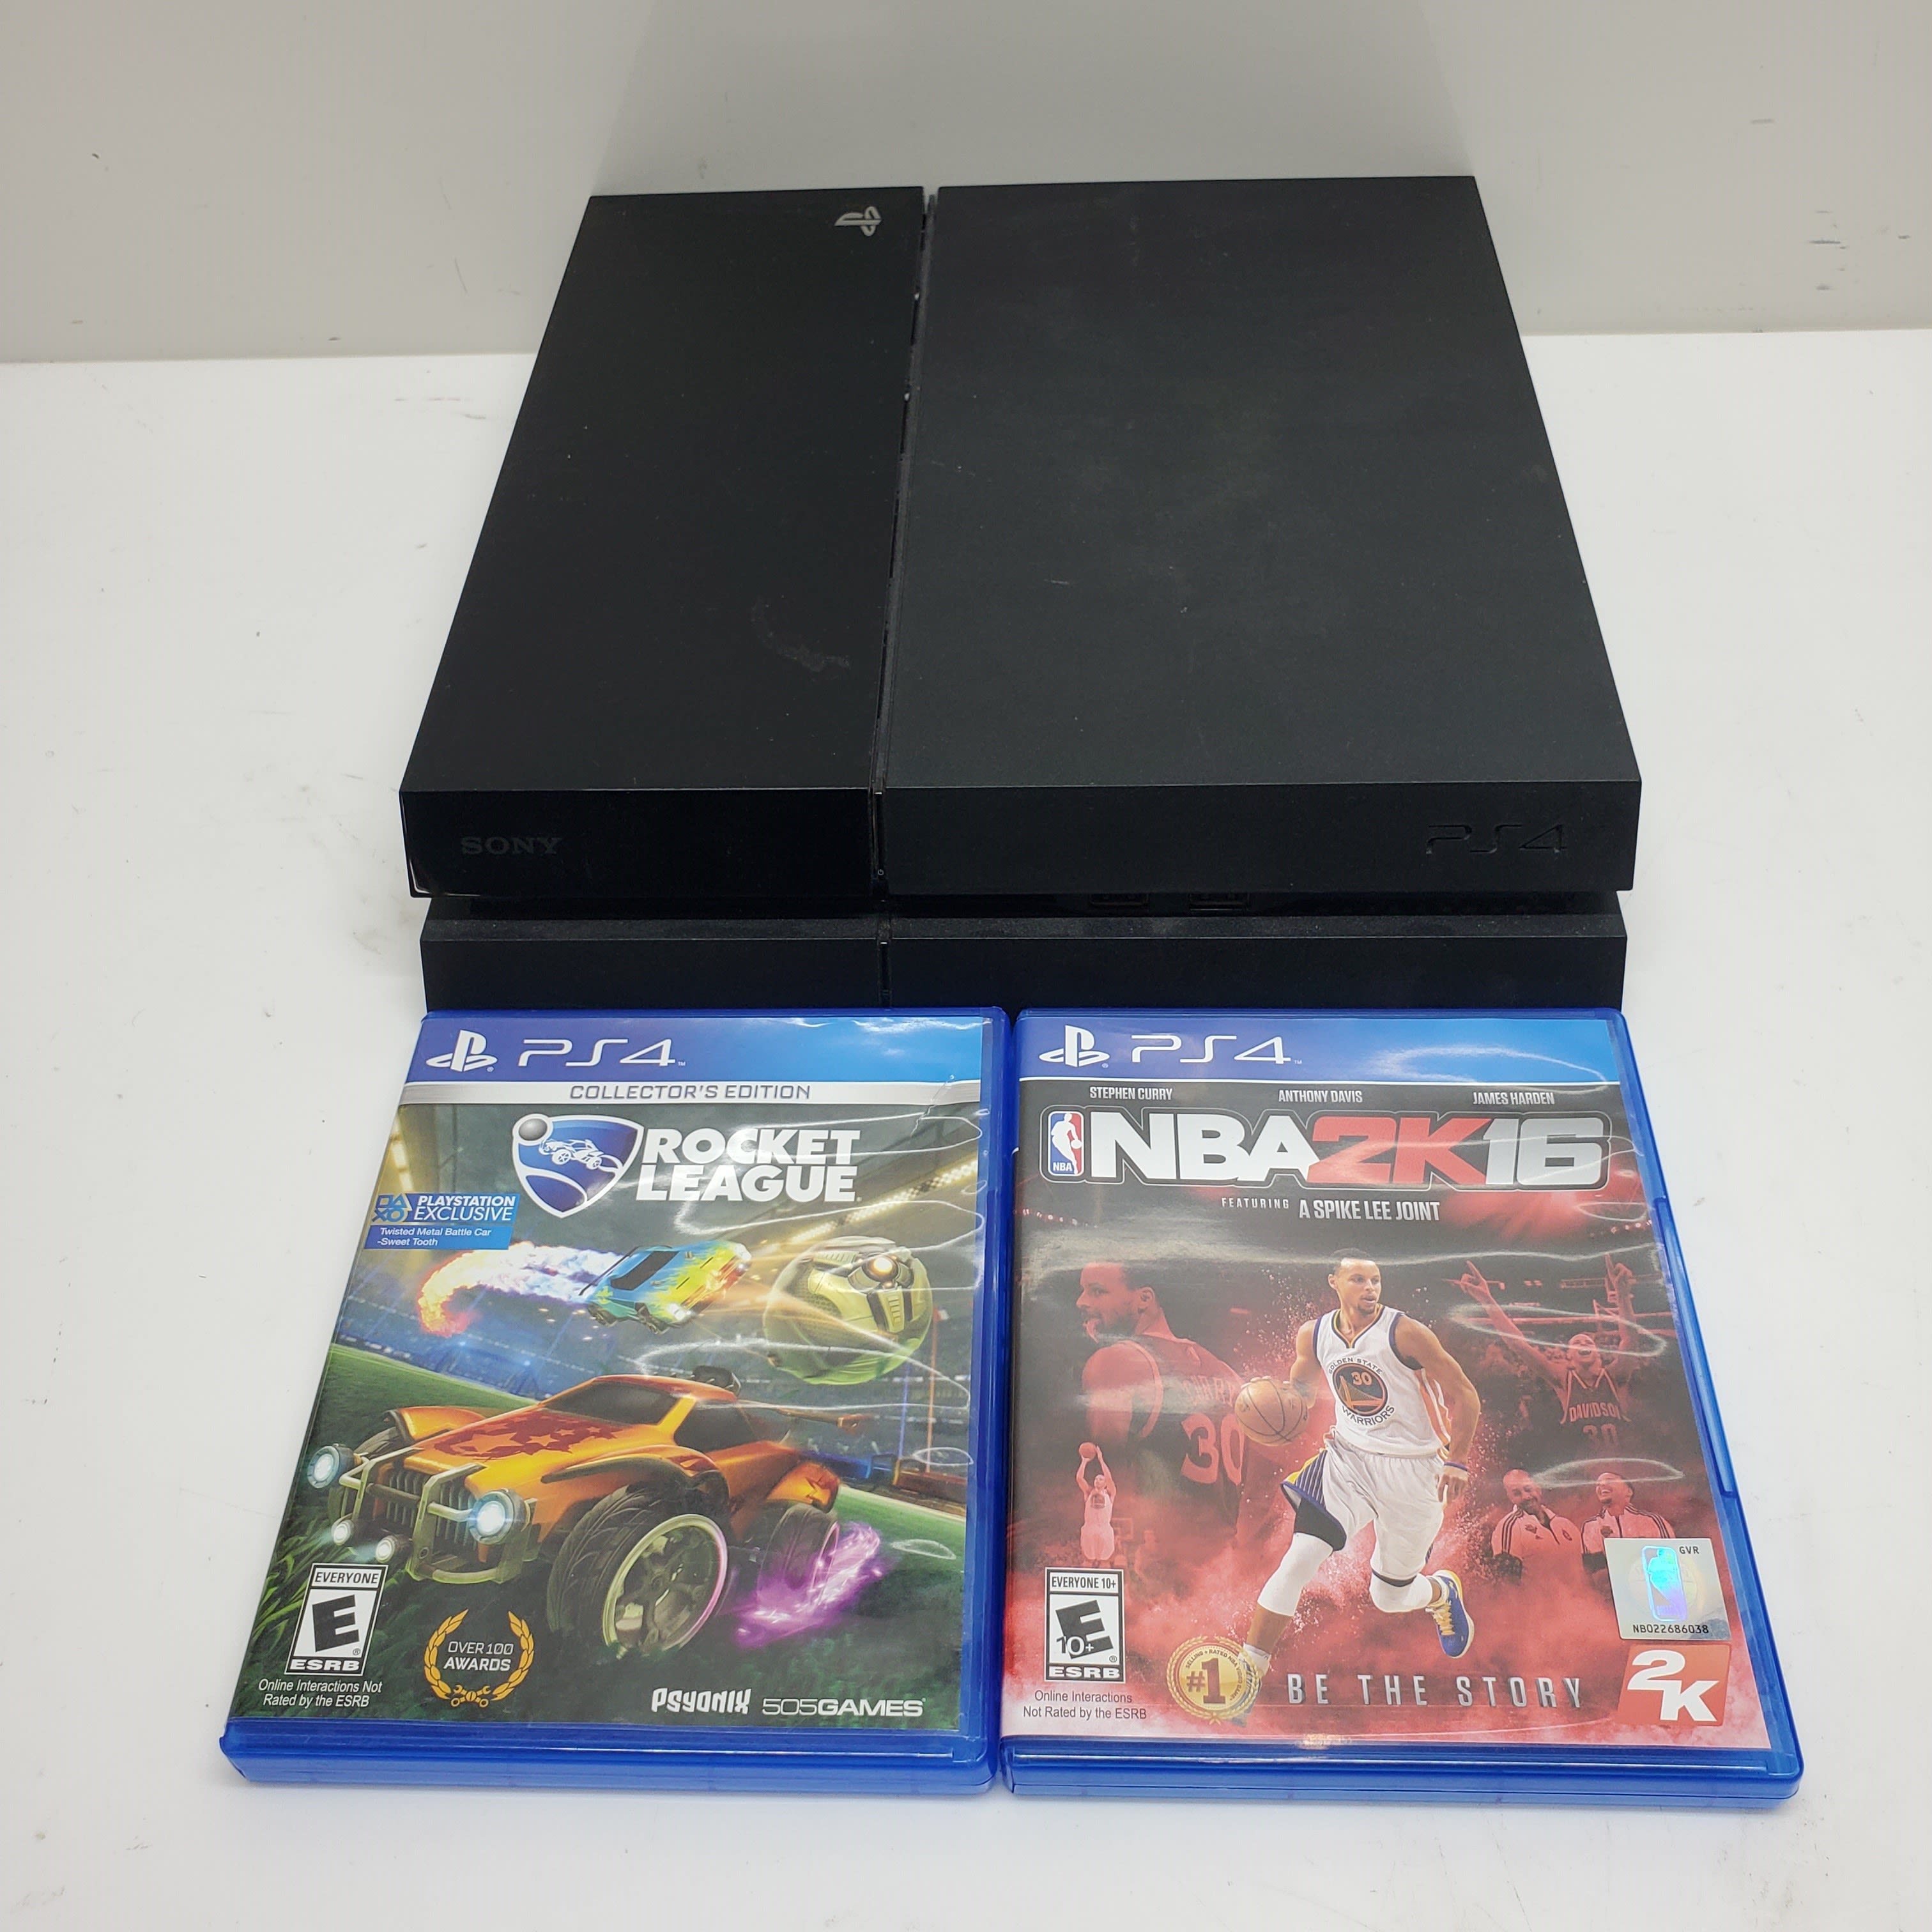 Buy the Sony PlayStation 4 PS4 500GB Console & Games #5 